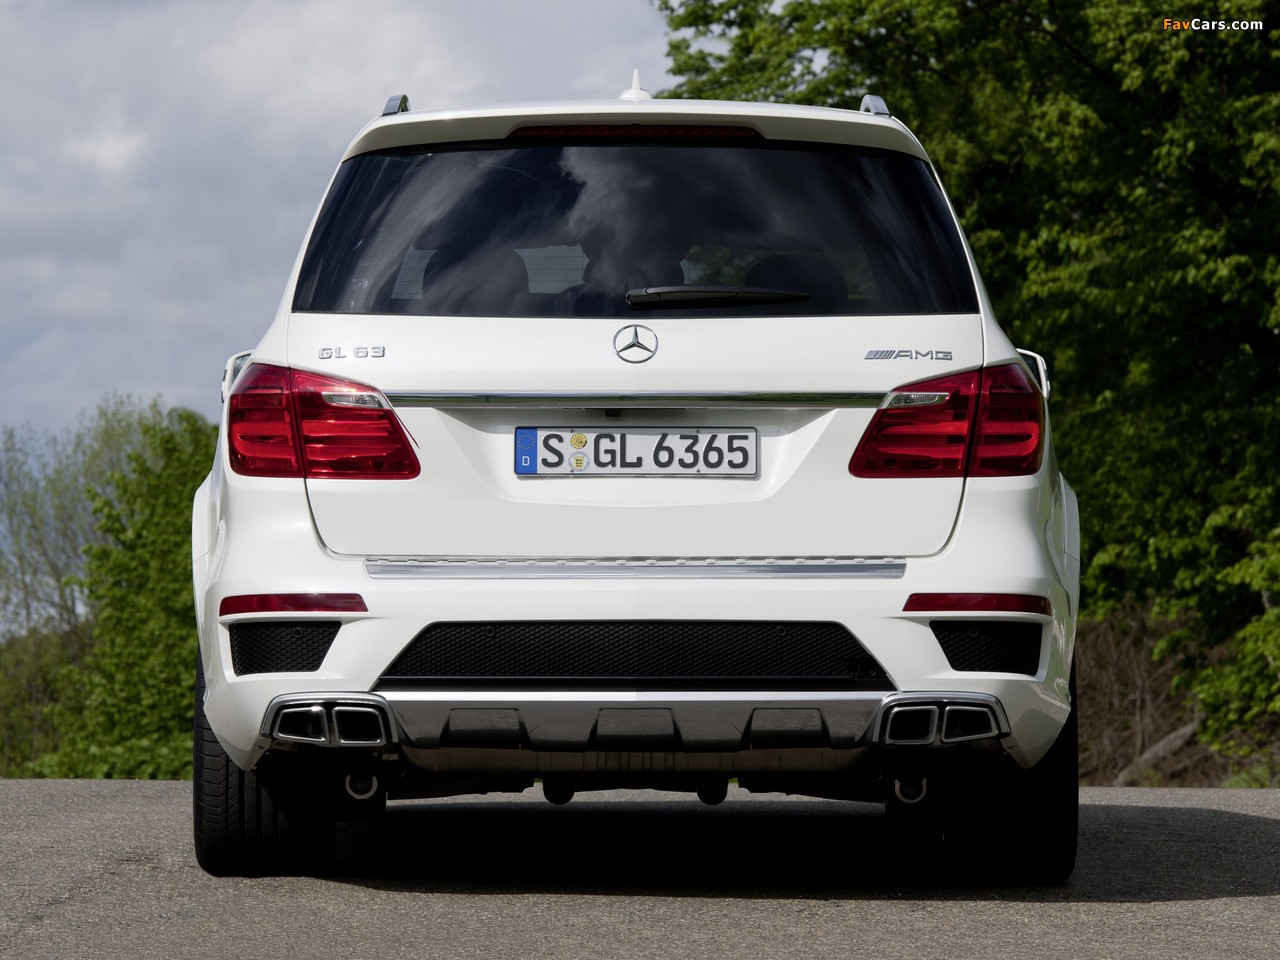 Mercedes-Benz GL 63 AMG (X166) 2012 pictures (1280 x 960)